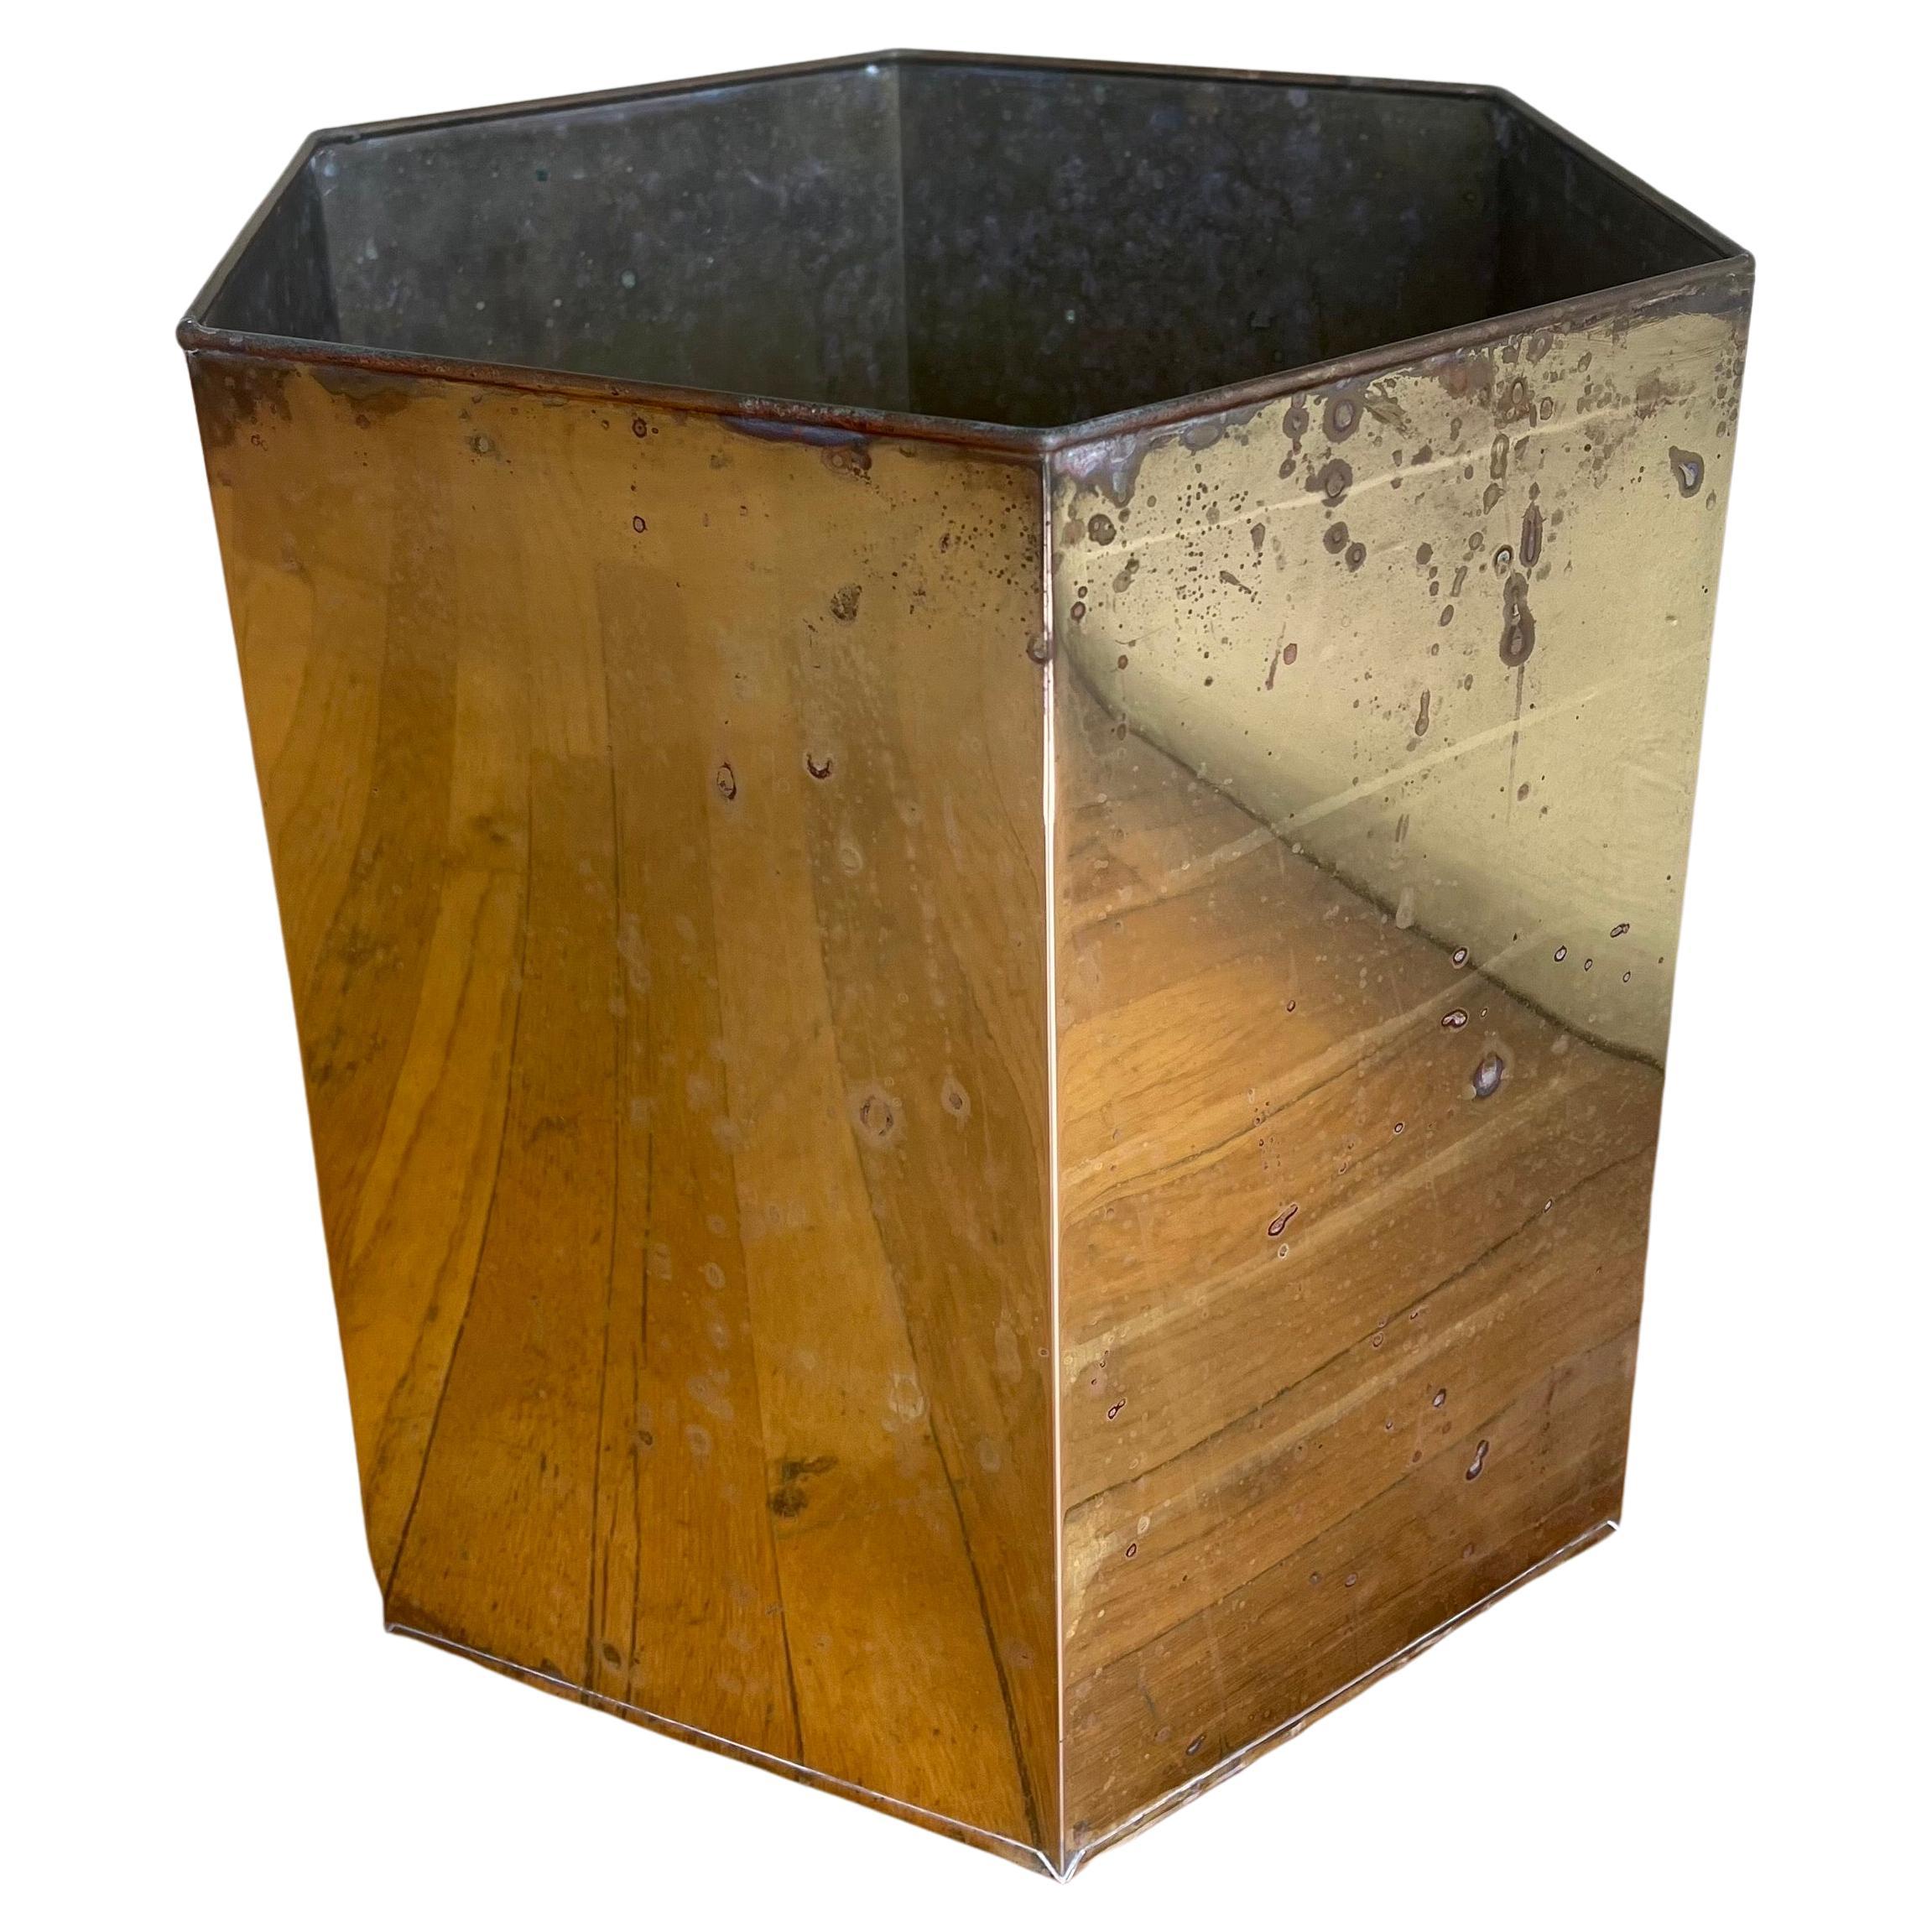 Great decorative large hexagonal solid polished brass thin walls planter, good quality piece circa 1970s, excellent welding no scratches can be polished to mirror shine, but we are selling it AS/IS condition.